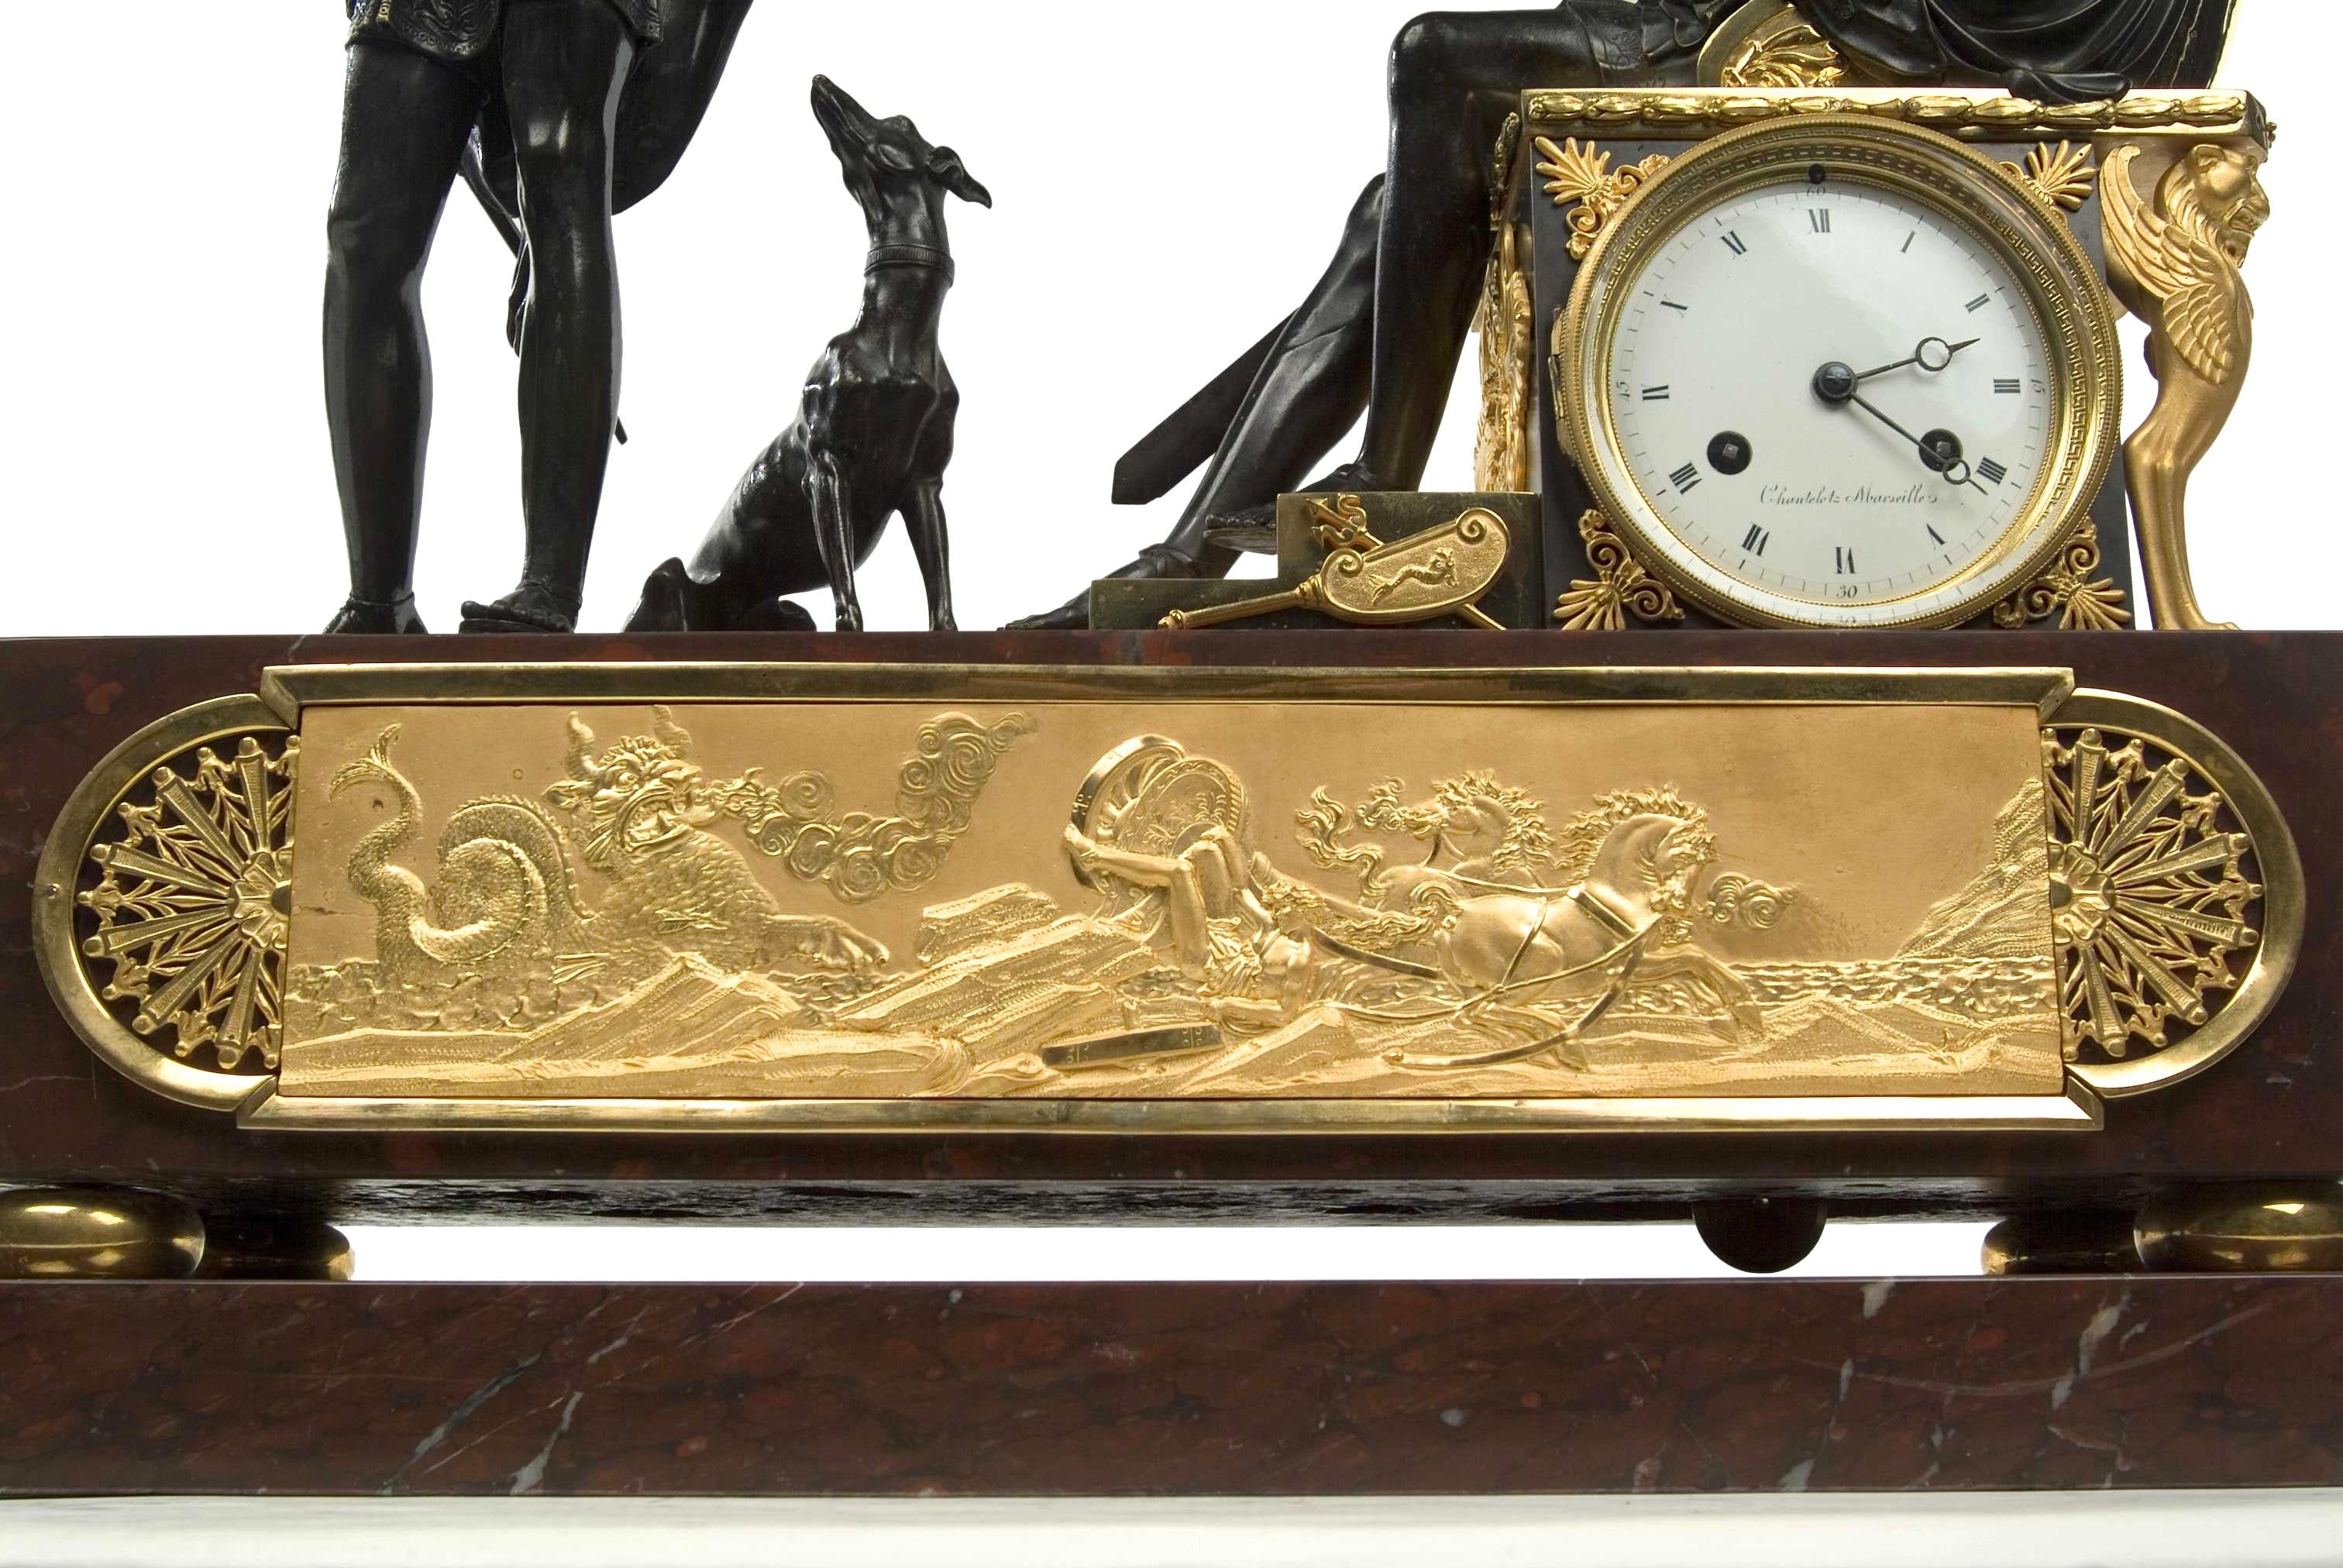 A rare piece of French Empire decorative art; a mantel clock in gilt and patinated bronze on a double plinth of red griotte marble. The clock tells the story of Theseus, seated on a throne, questioning Hippolytus about his incestuous relations with